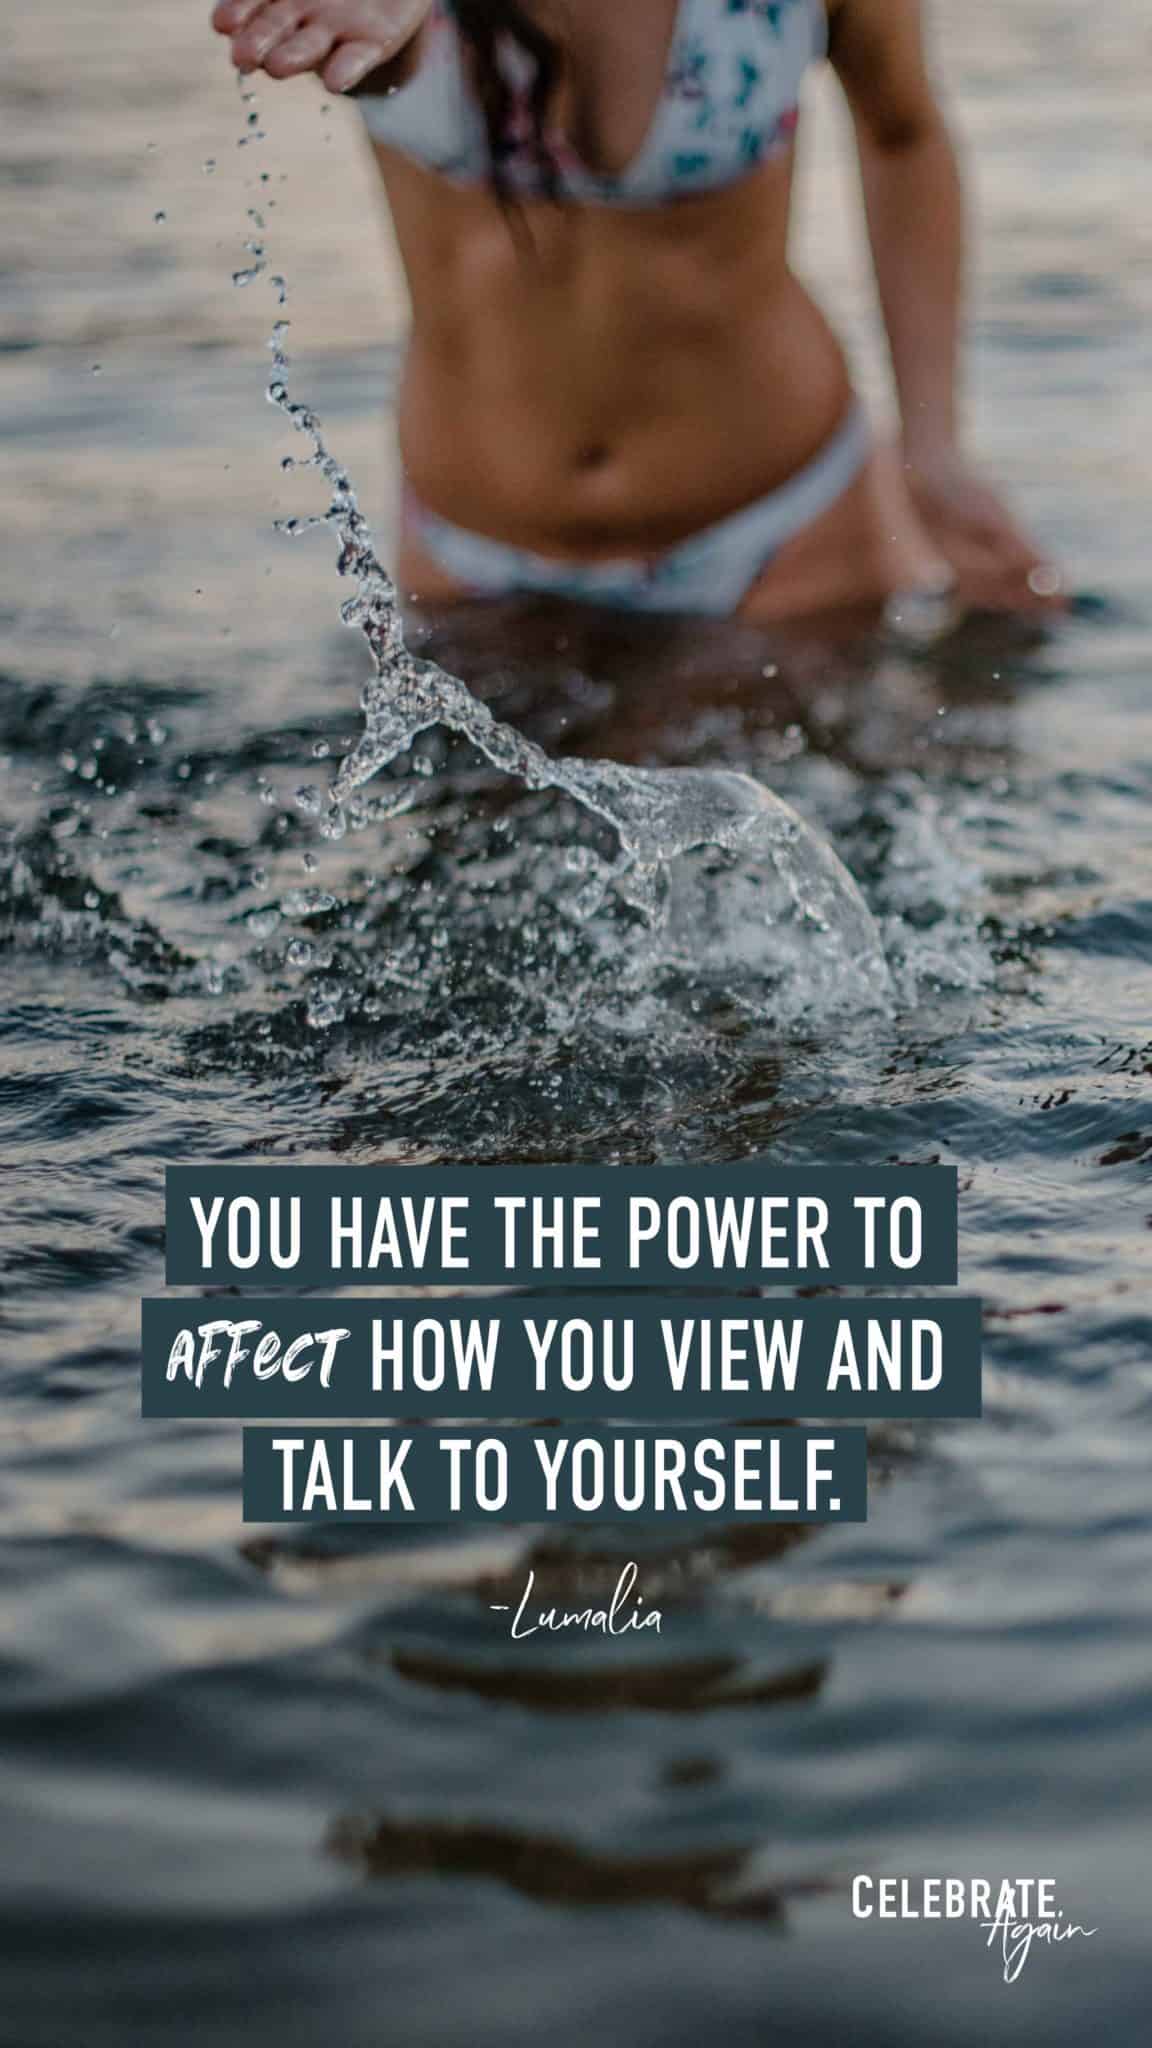 “You have the power to affect how you view and talk to yourself.” - Lumalia text over a female pouring water in a river